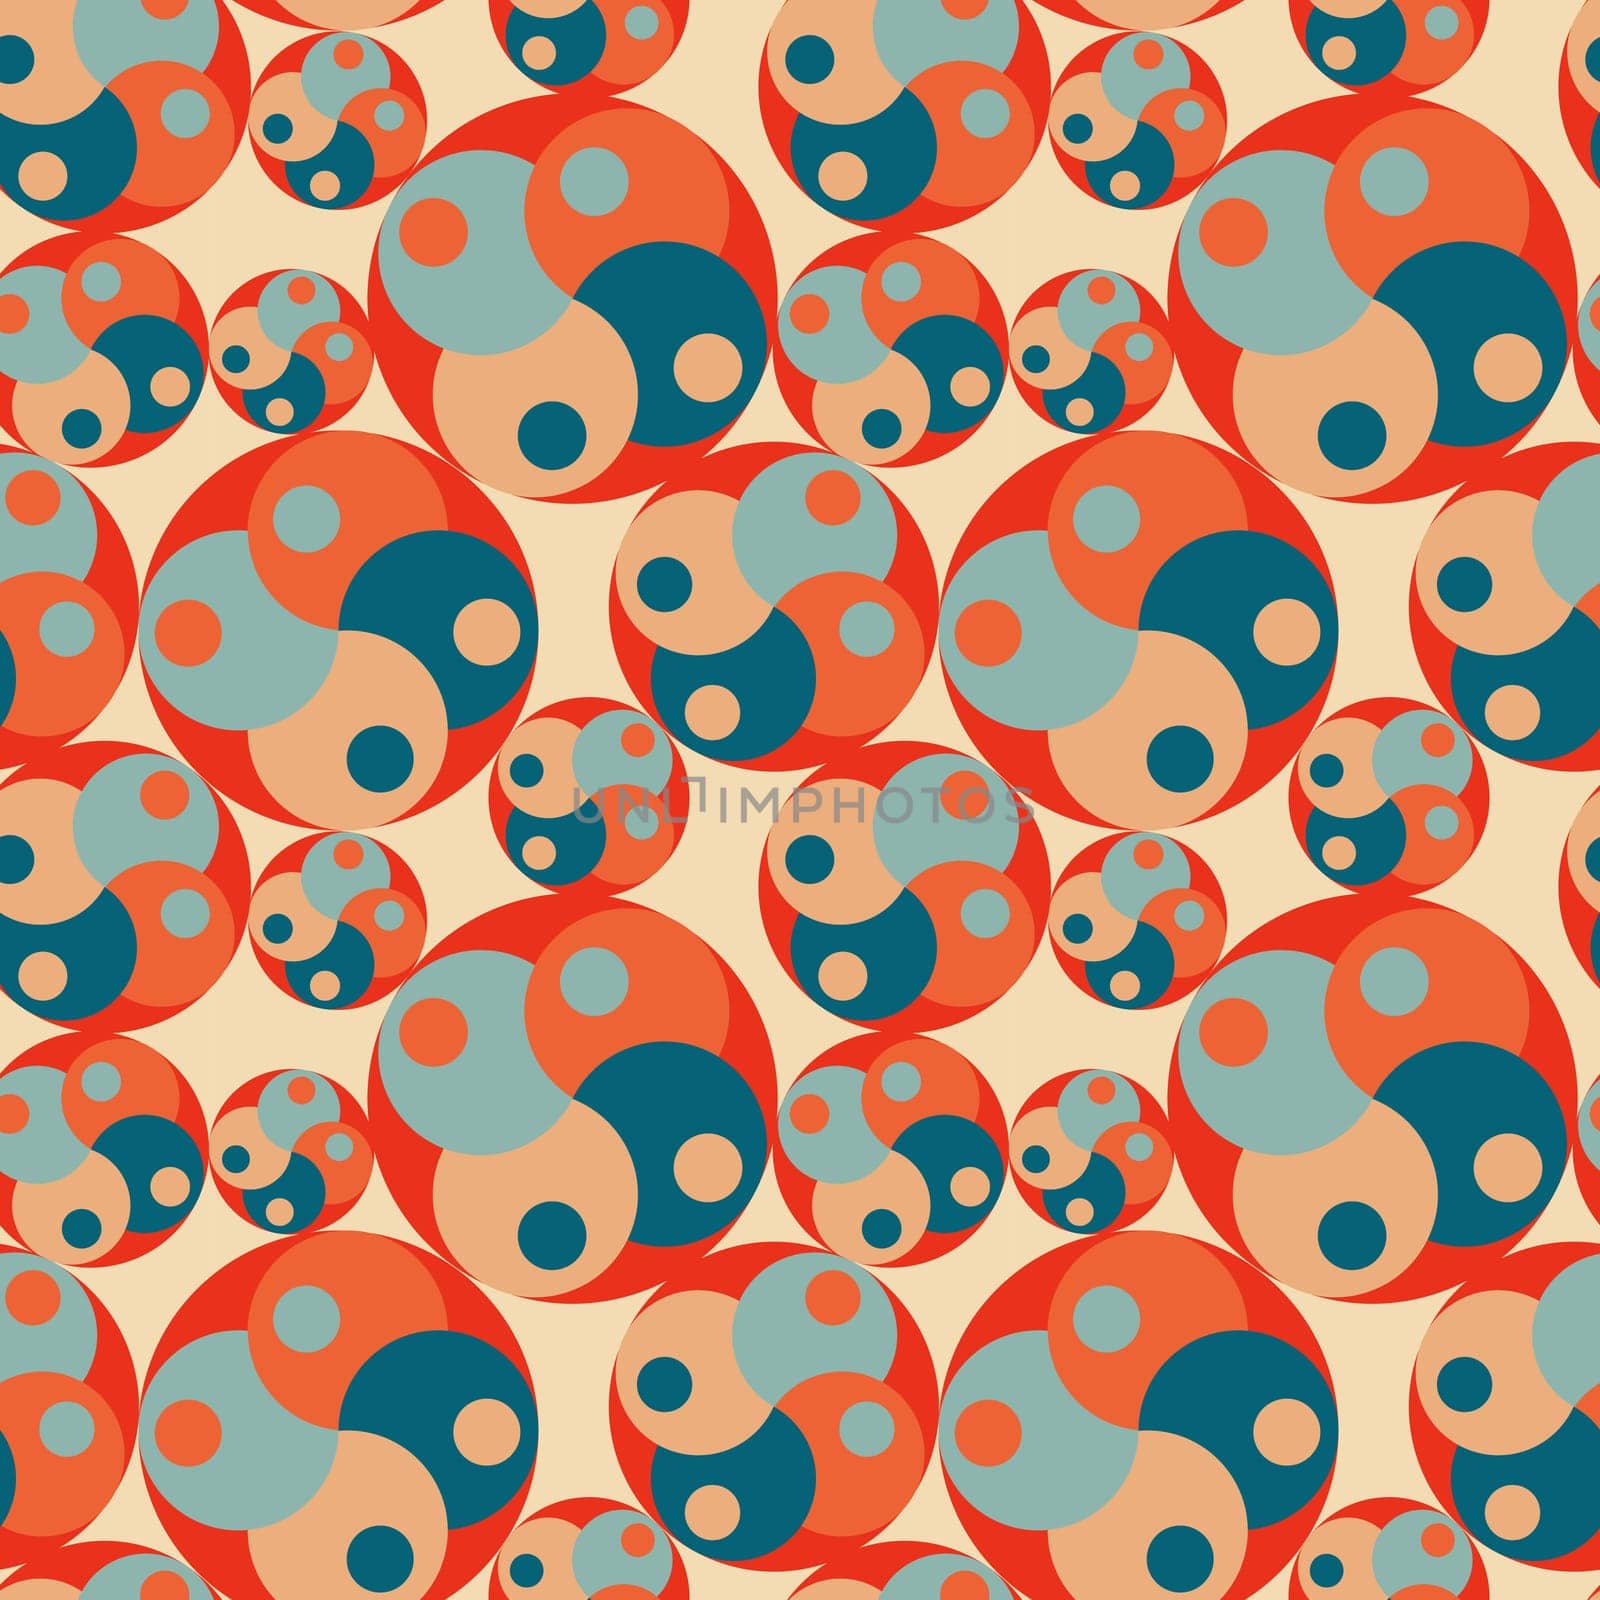 Vintage geometric pattern with circles in the style of the 70s and 60s. by Dustick